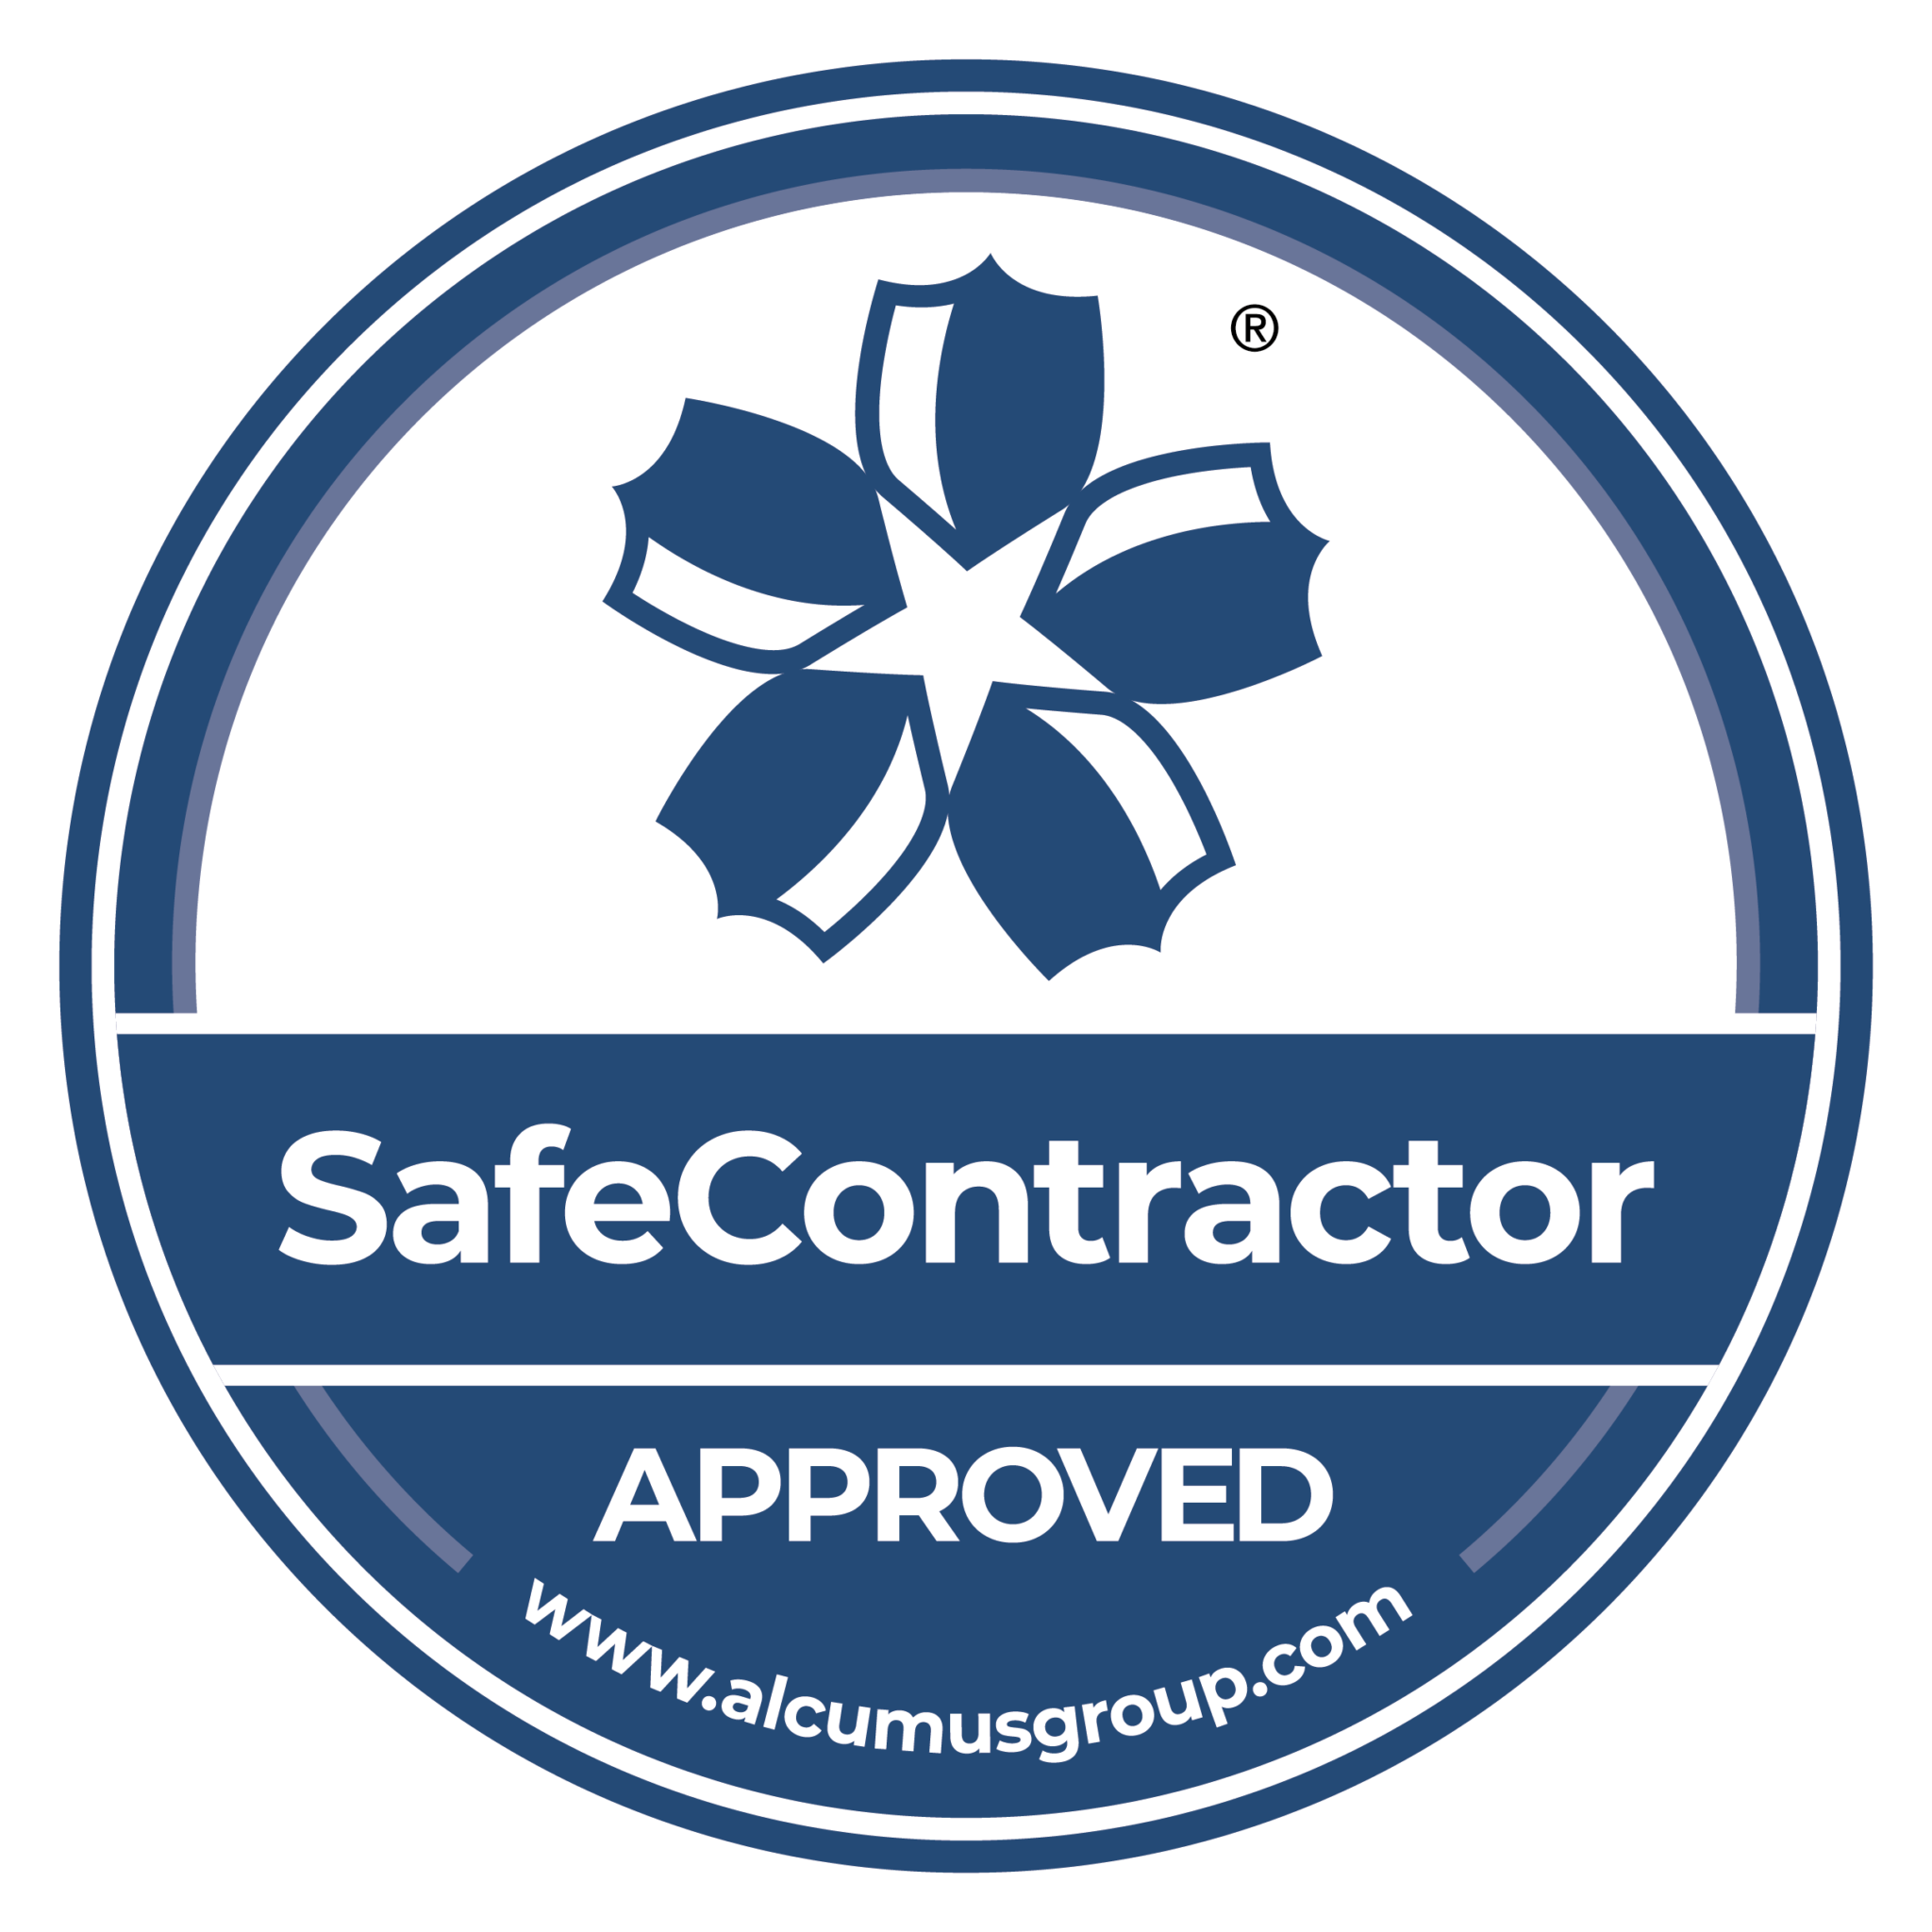 Image of Safe Contractor